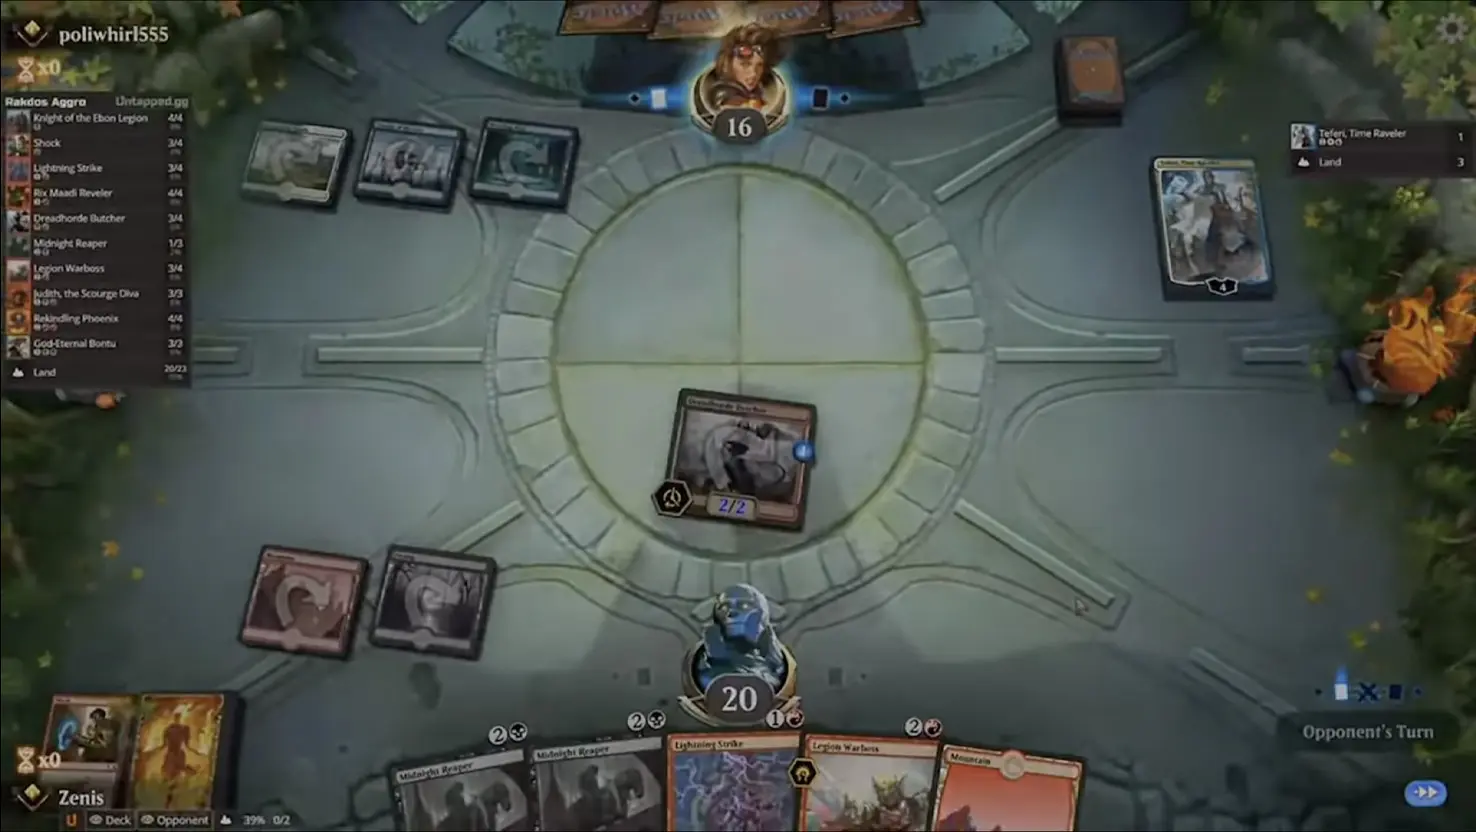 The Untapped.gg Companion overlay and features in Magic the Gathering: Arena